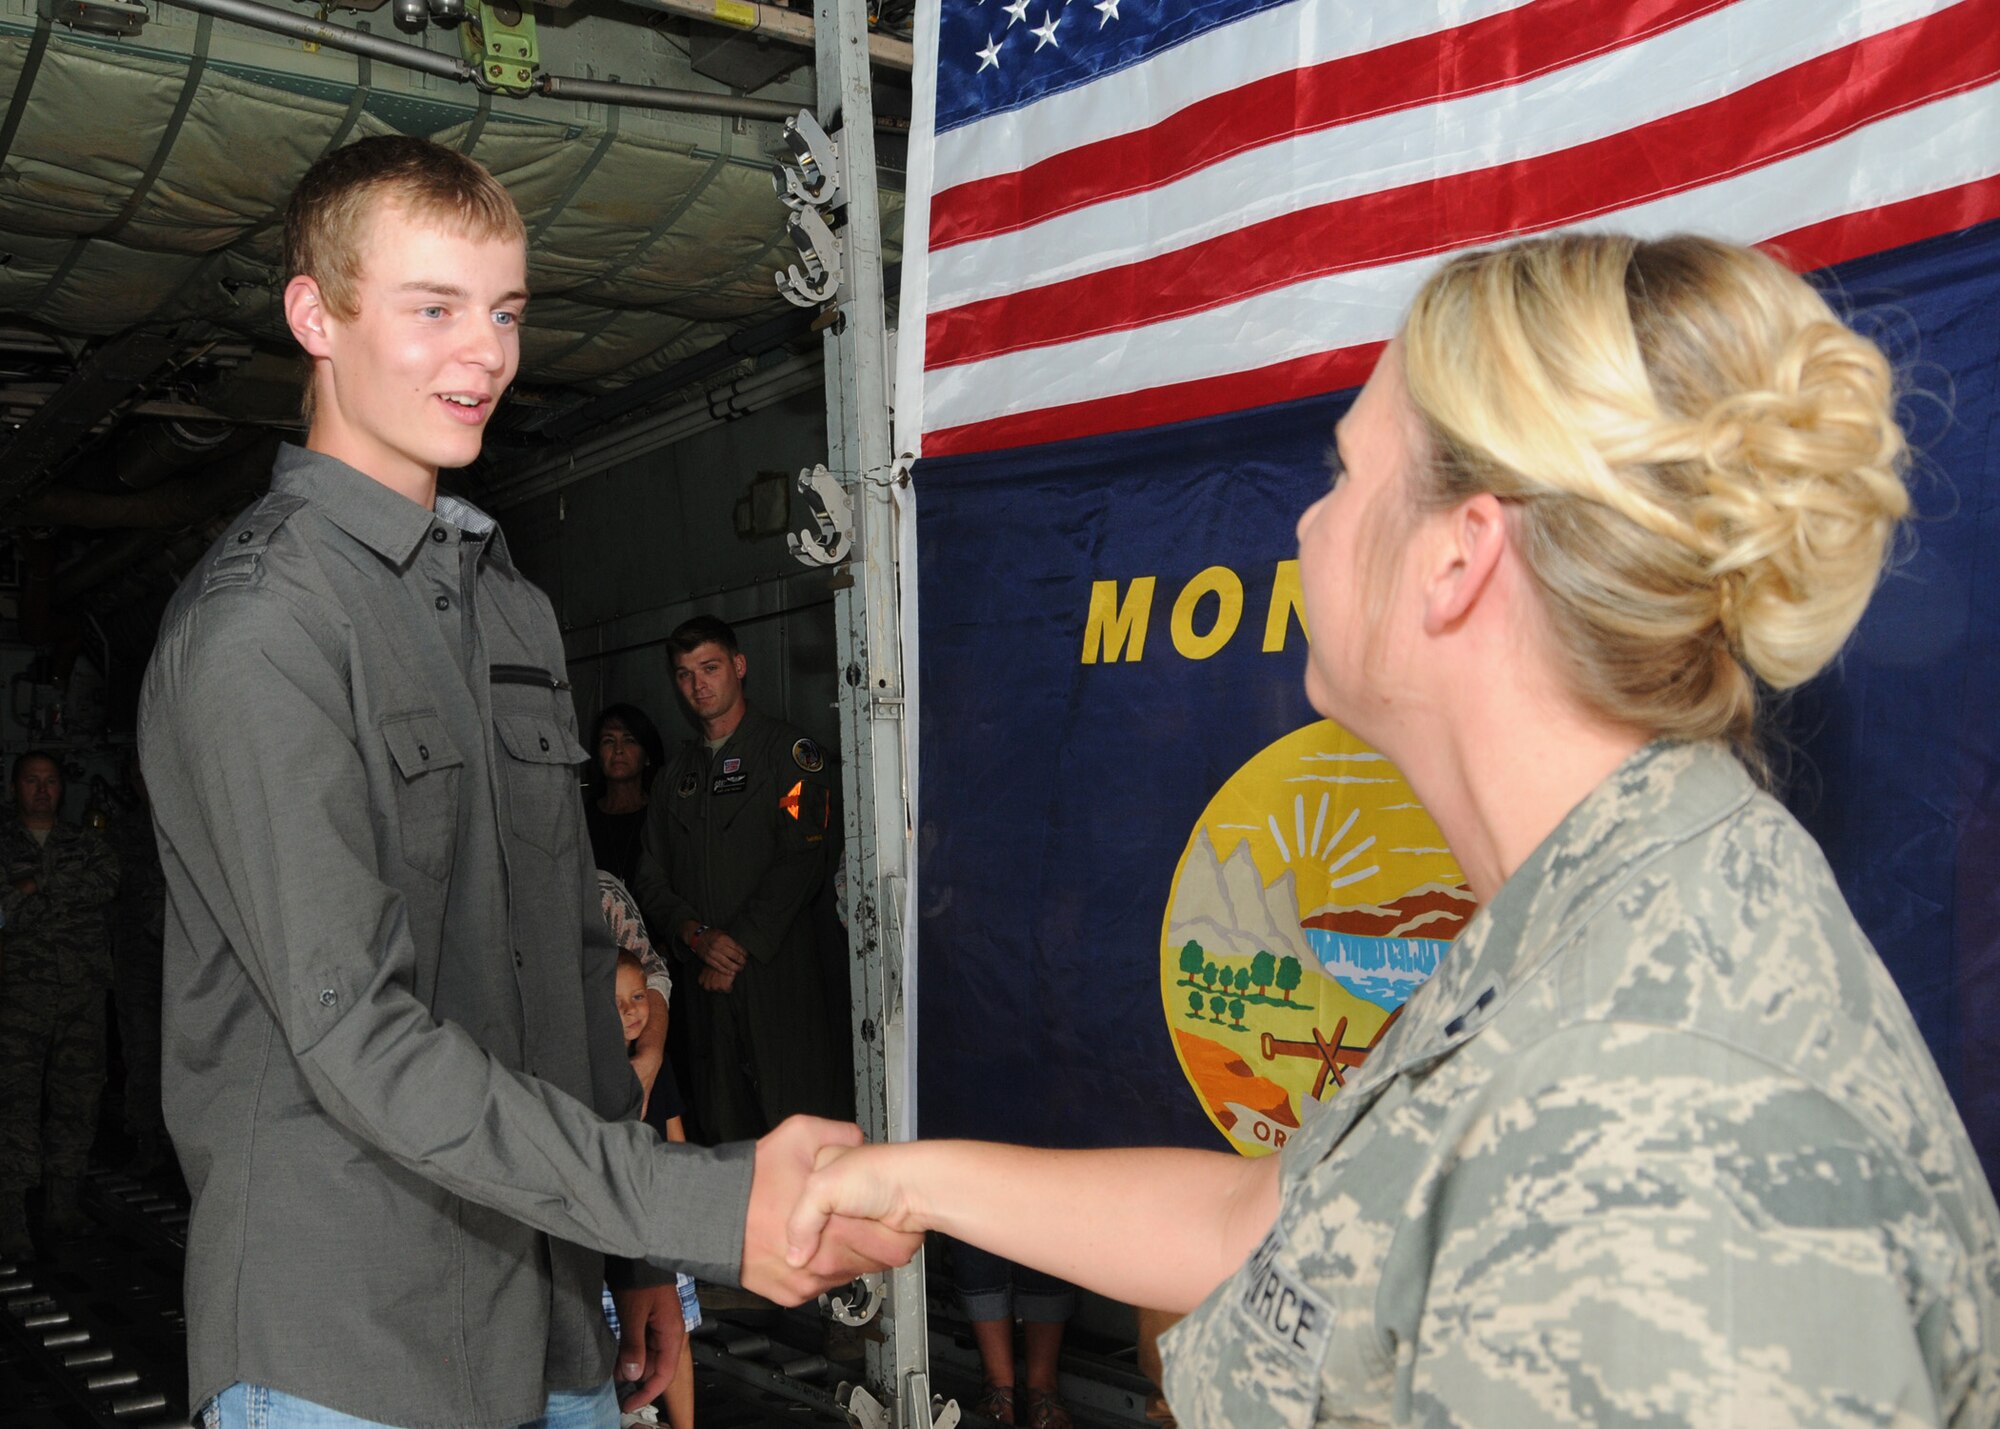 Tyler LaPierre is congratulated by Capt. Jennifer LaPierre Gunter following his Montana Air National Guard enlistment in the cargo hold of a C-130 Hercules transport aircraft parked at the 120th Airlift Wing in Great Falls, Mont. Aug. 31, 2016. Gunter administered LaPierre’s oath of enlistment. (U.S. Air National Guard photo by Senior Master Sgt. Eric Peterson)